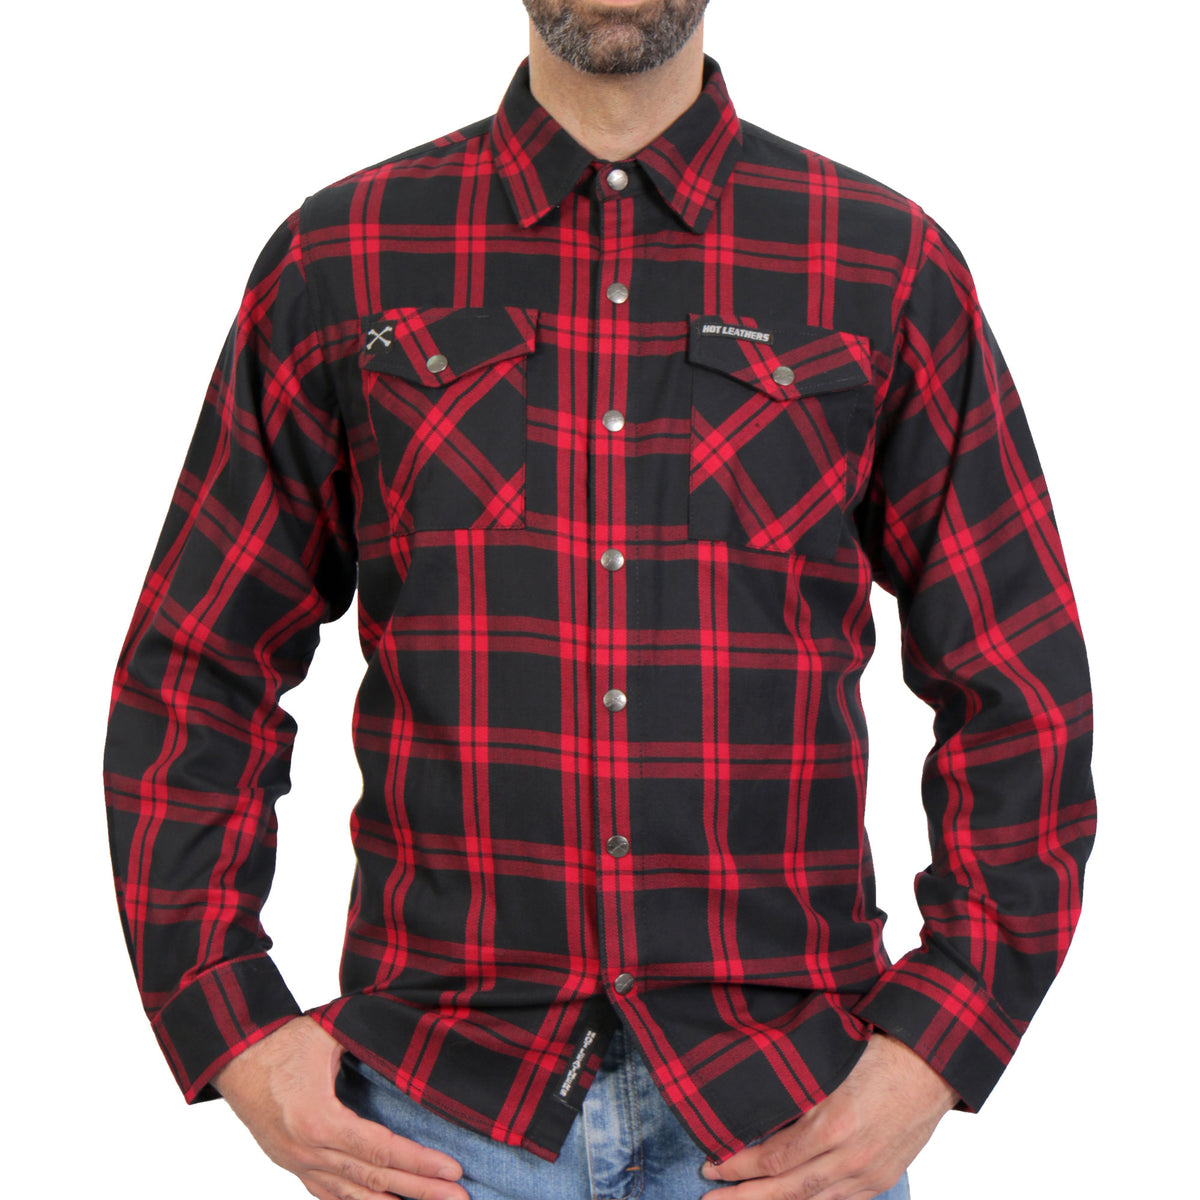 Hot Leathers FLM3001 Men's 'Red and Black' Long Sleeve Flannel